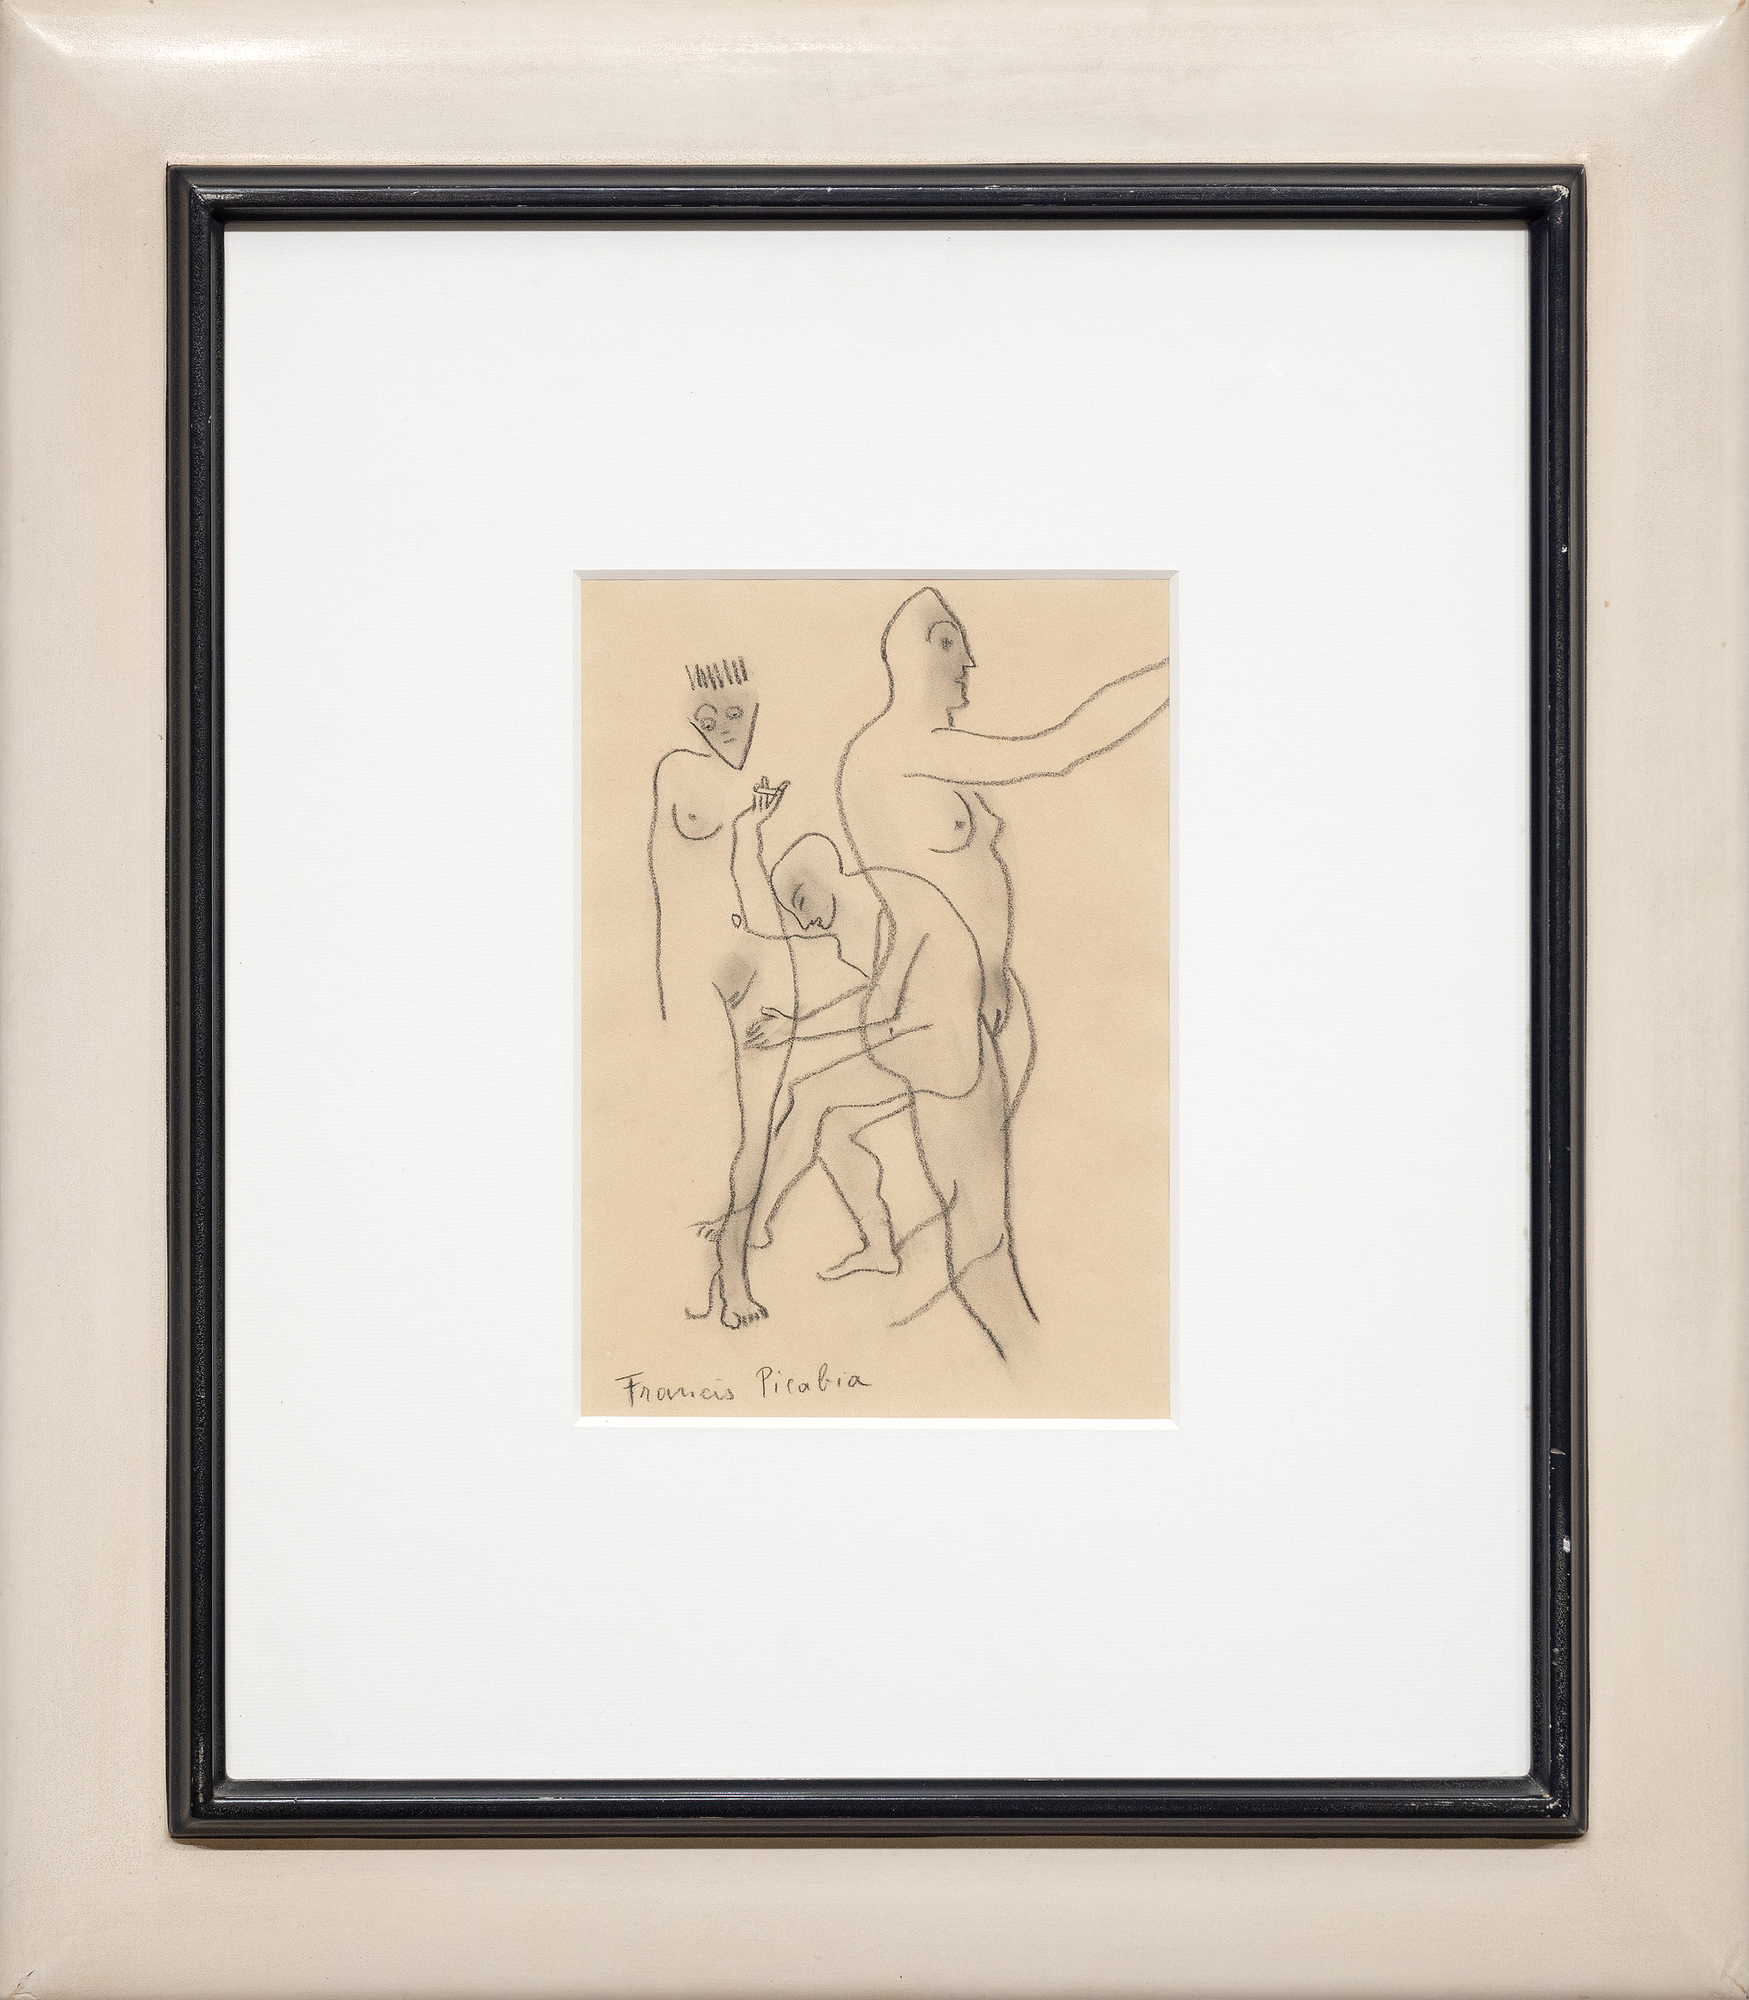 FRANCIS PICABIA - Trois personnages nus - black conte crayon on buff paper - 11 1/2 x 8 in.